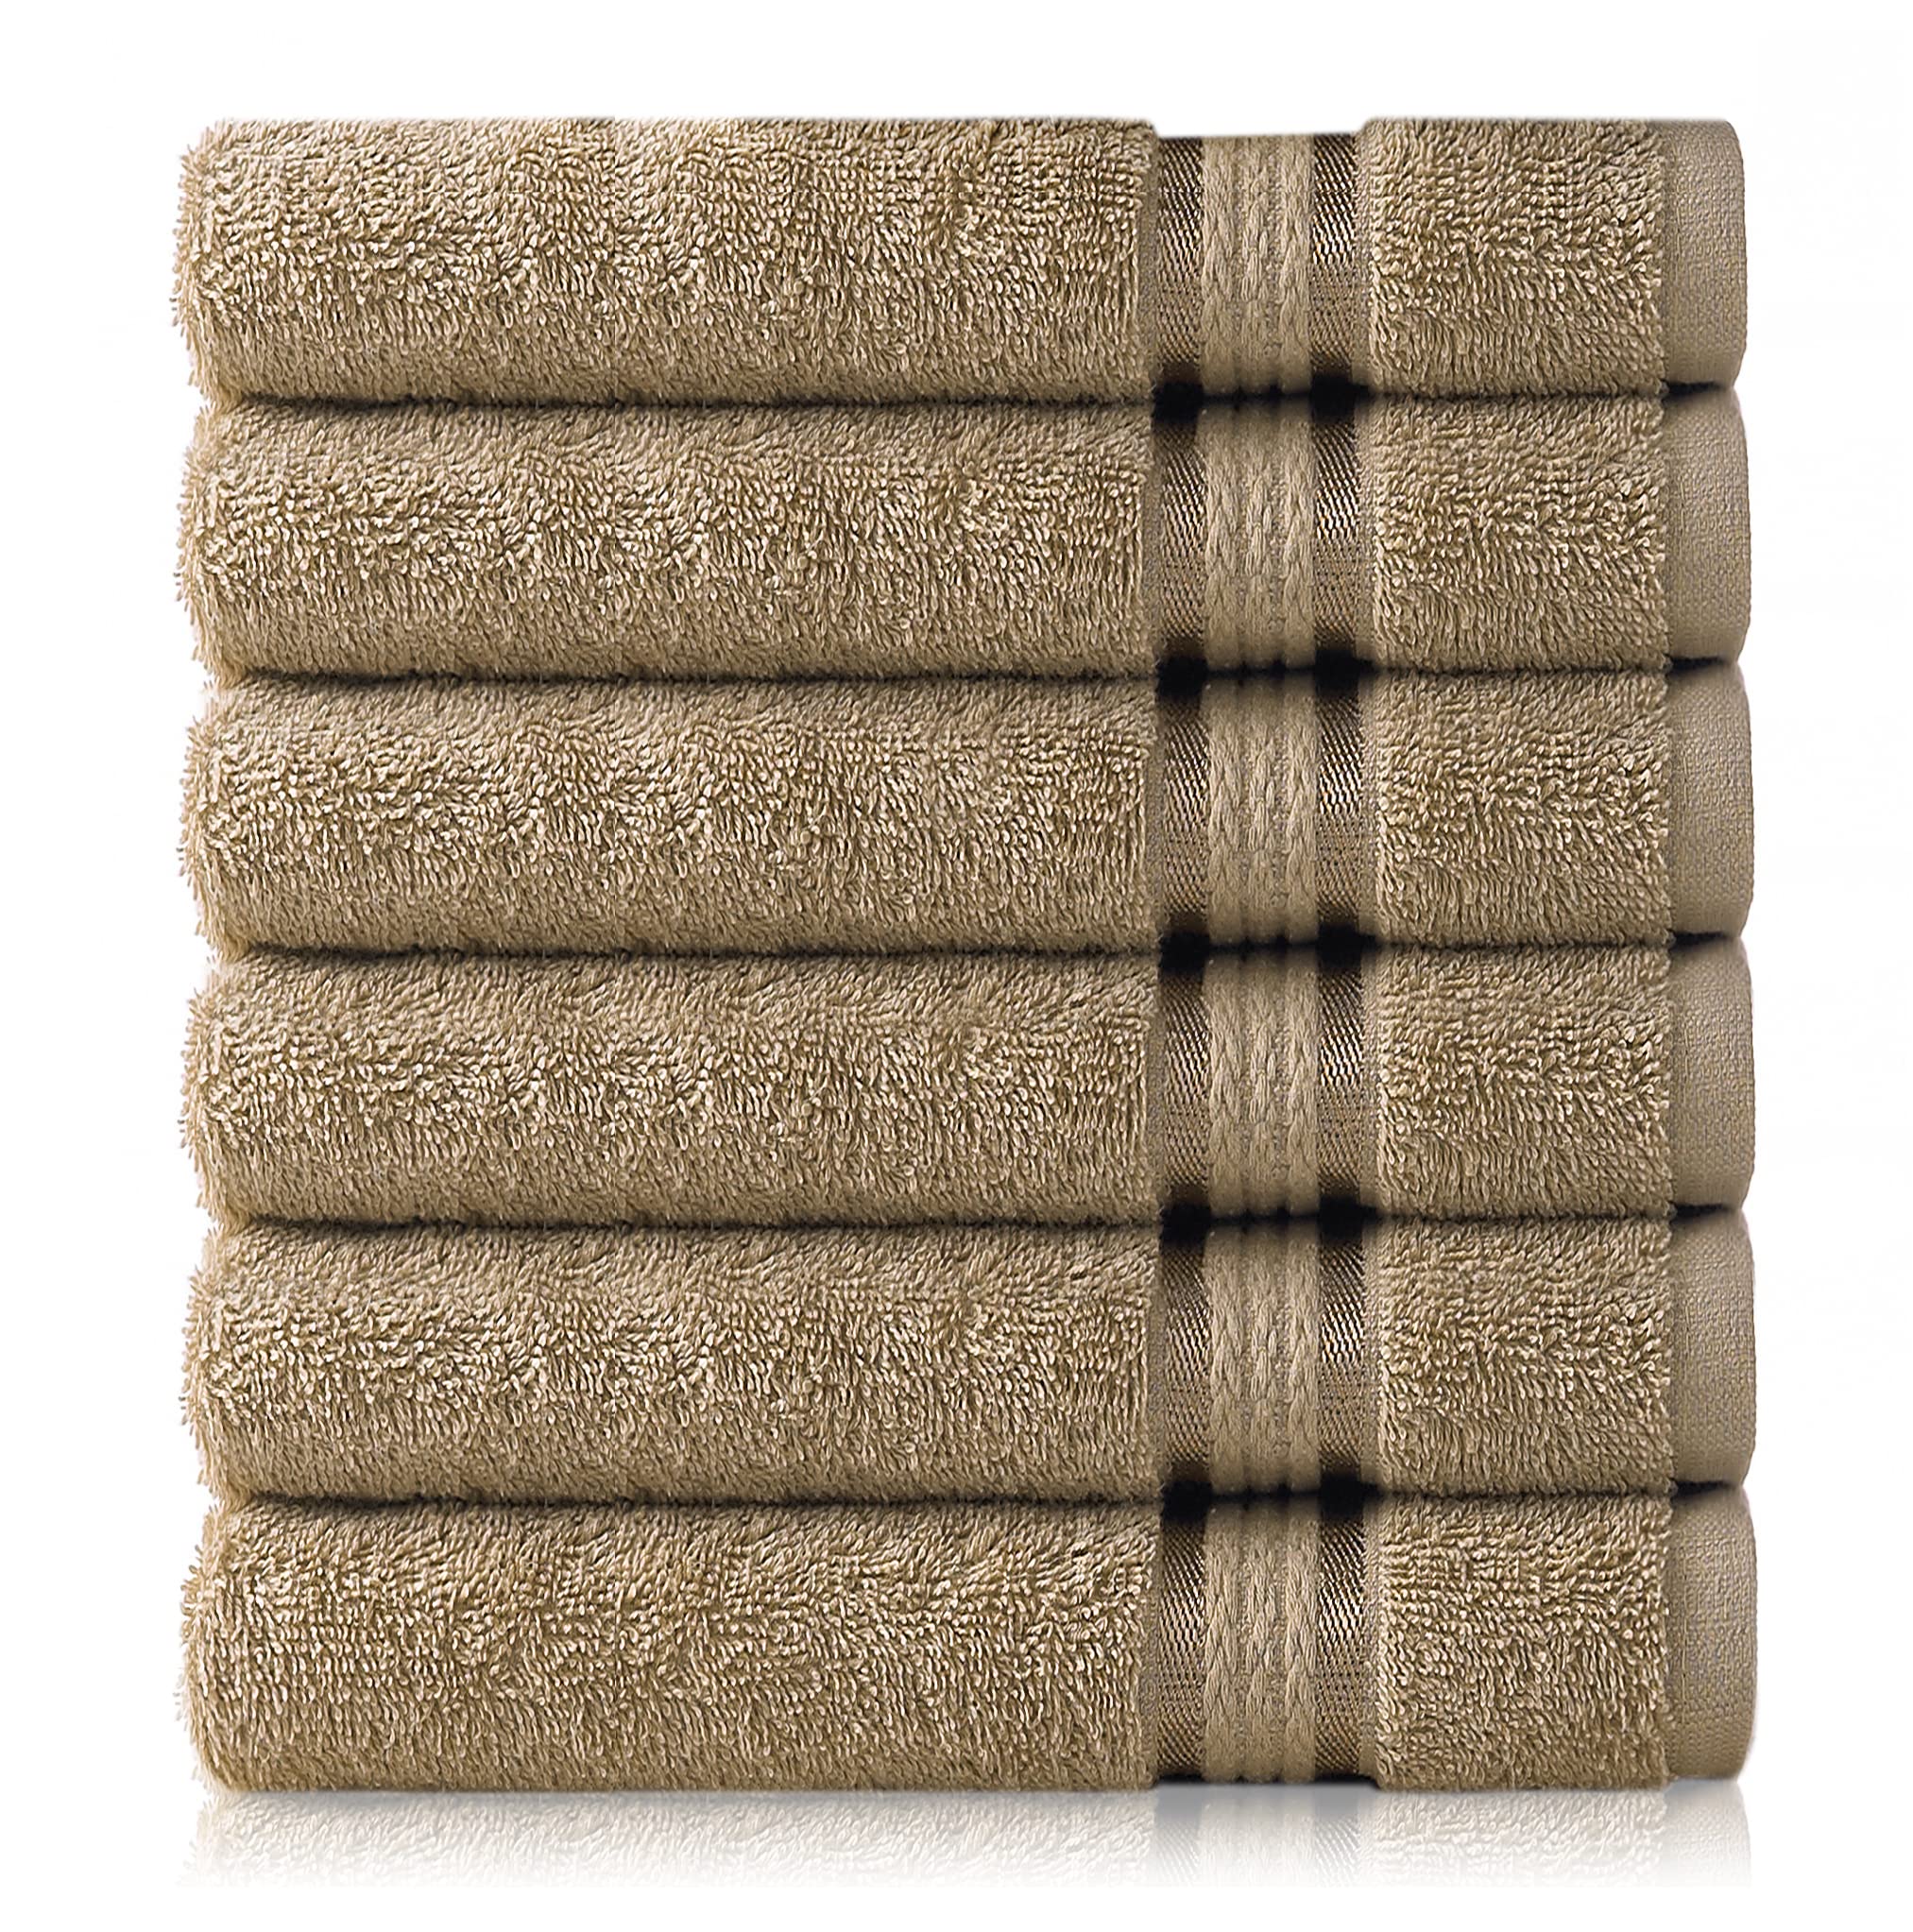 Book Cover COTTON CRAFT Ultra Soft Hand Towels - 6 Pack - 16x28-100% Cotton Face Towel Set - Absorbent Quick Dry Everyday Luxury Hotel Bathroom Kitchen Spa Gym Shower Pool Camp Travel Picnic - Easy Care - Linen 6 Pack Hand Towels Linen